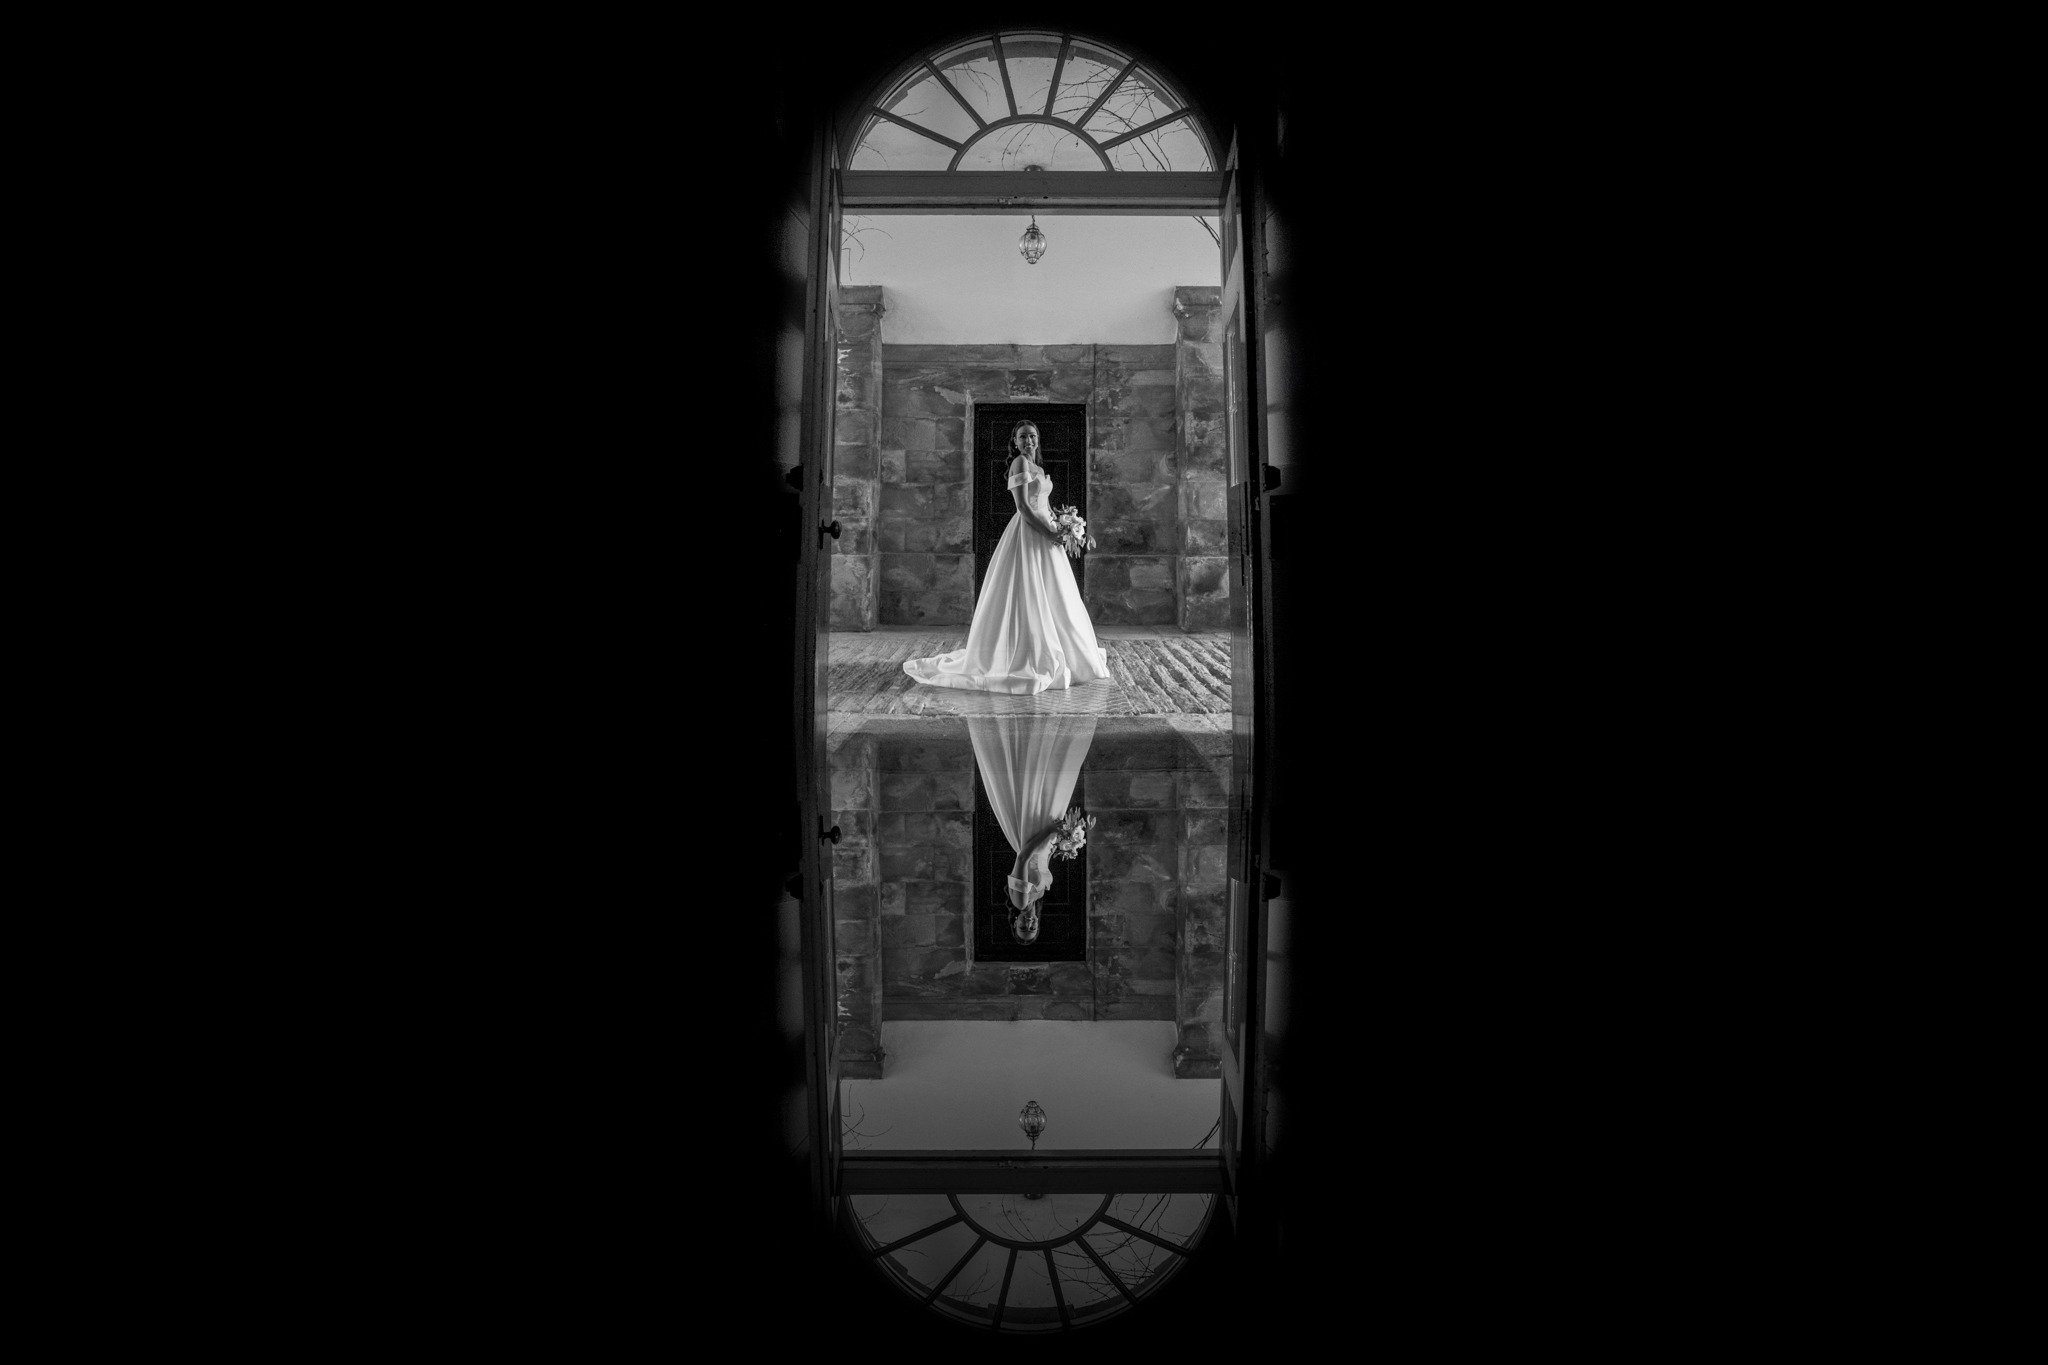 A black and white image of a bride looking forward. The shot is reflected by a mirror placed under the camera lens to create a reflection effect